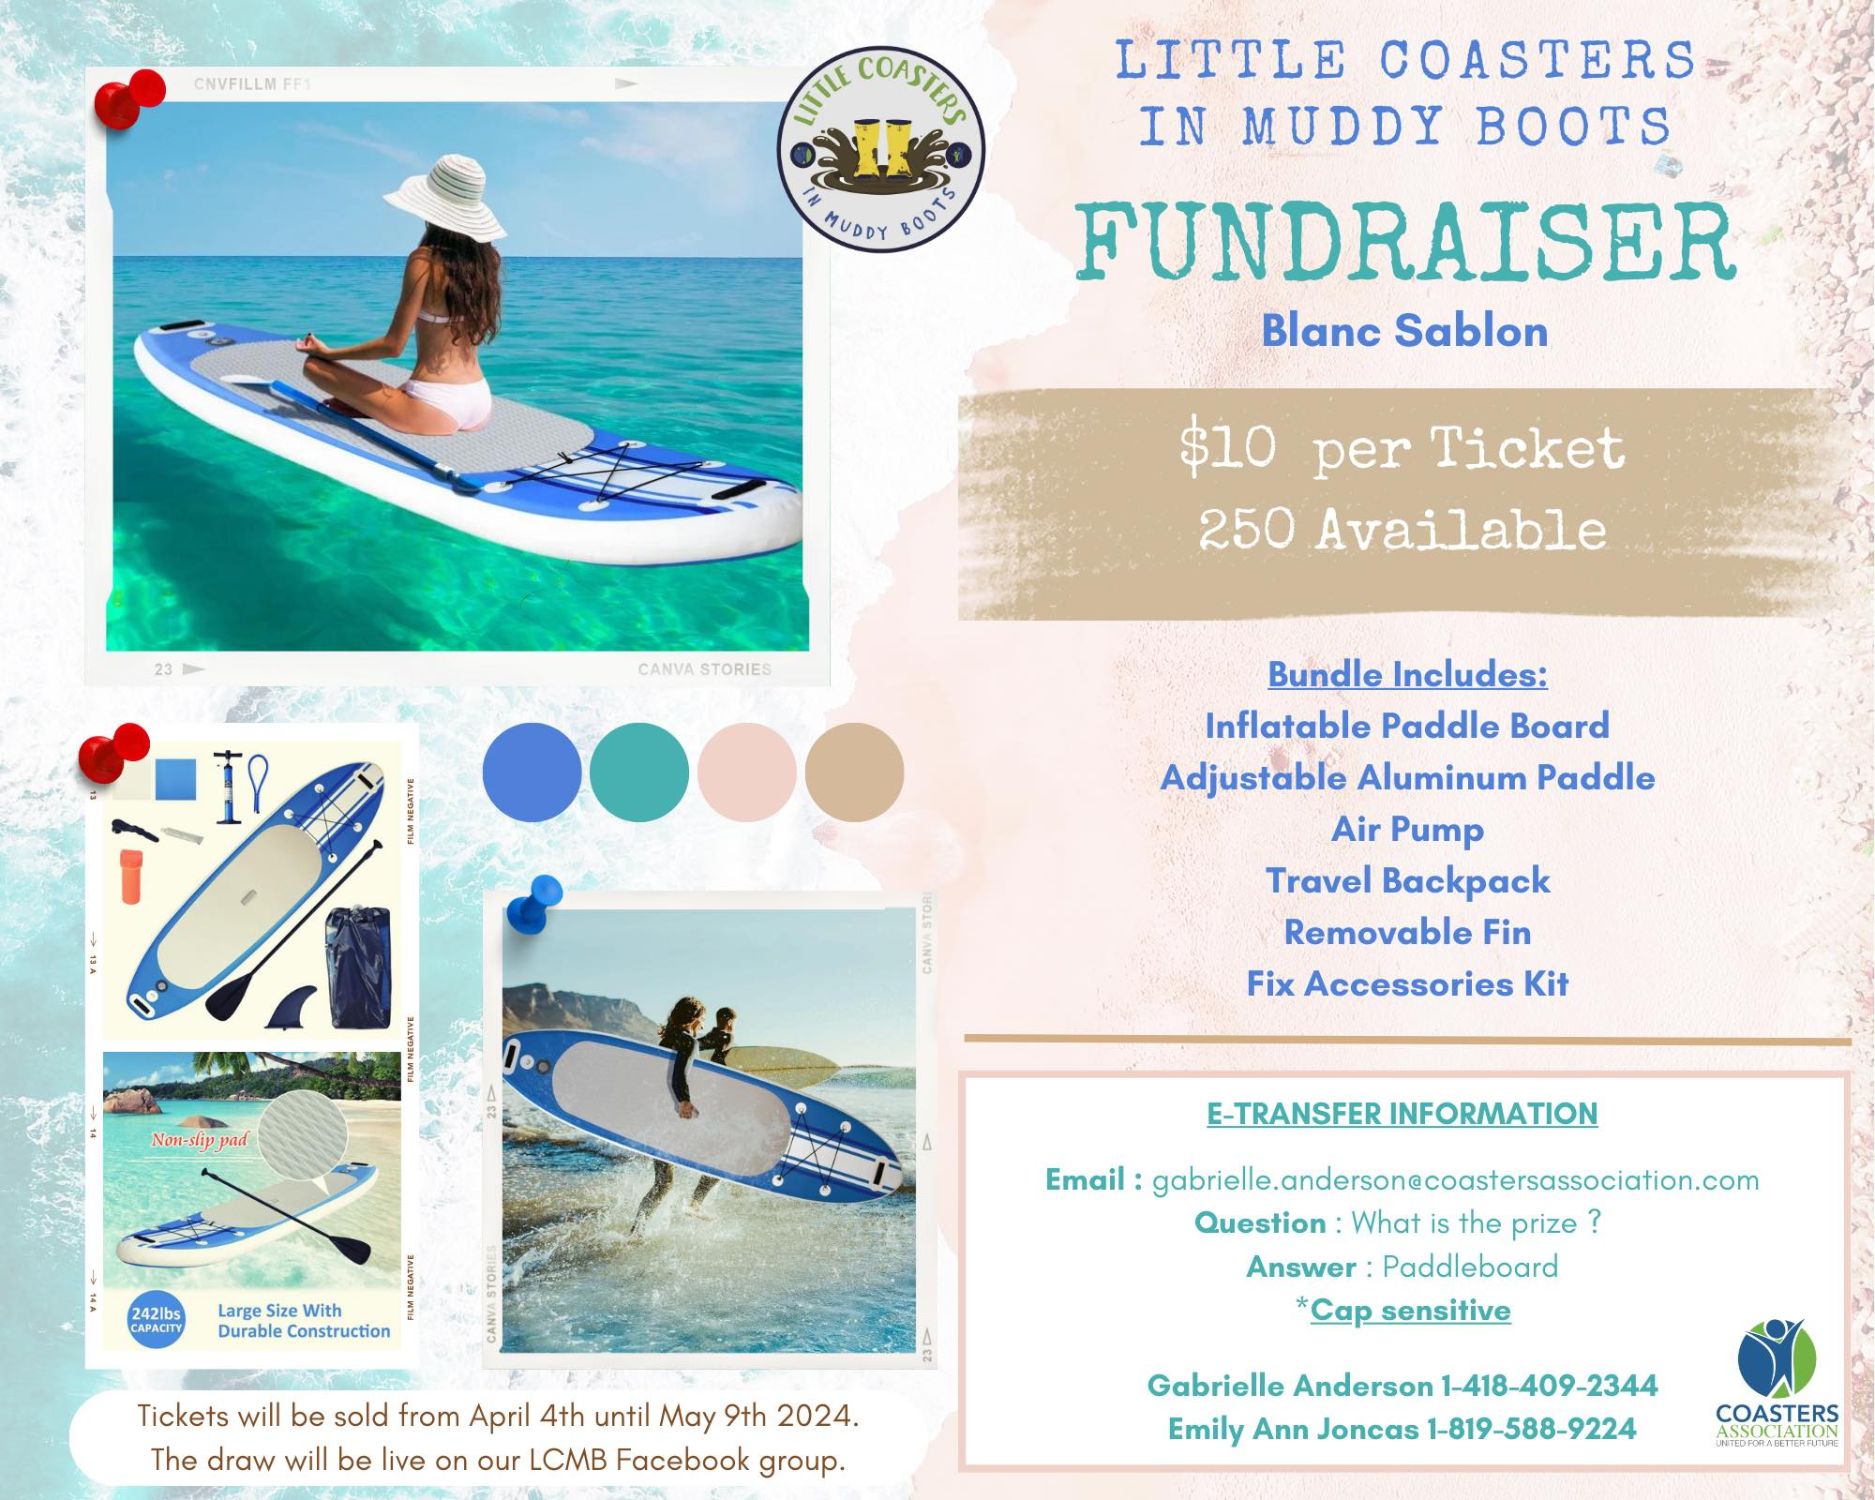 Little Coasters in Muddy Boots Fundraiser